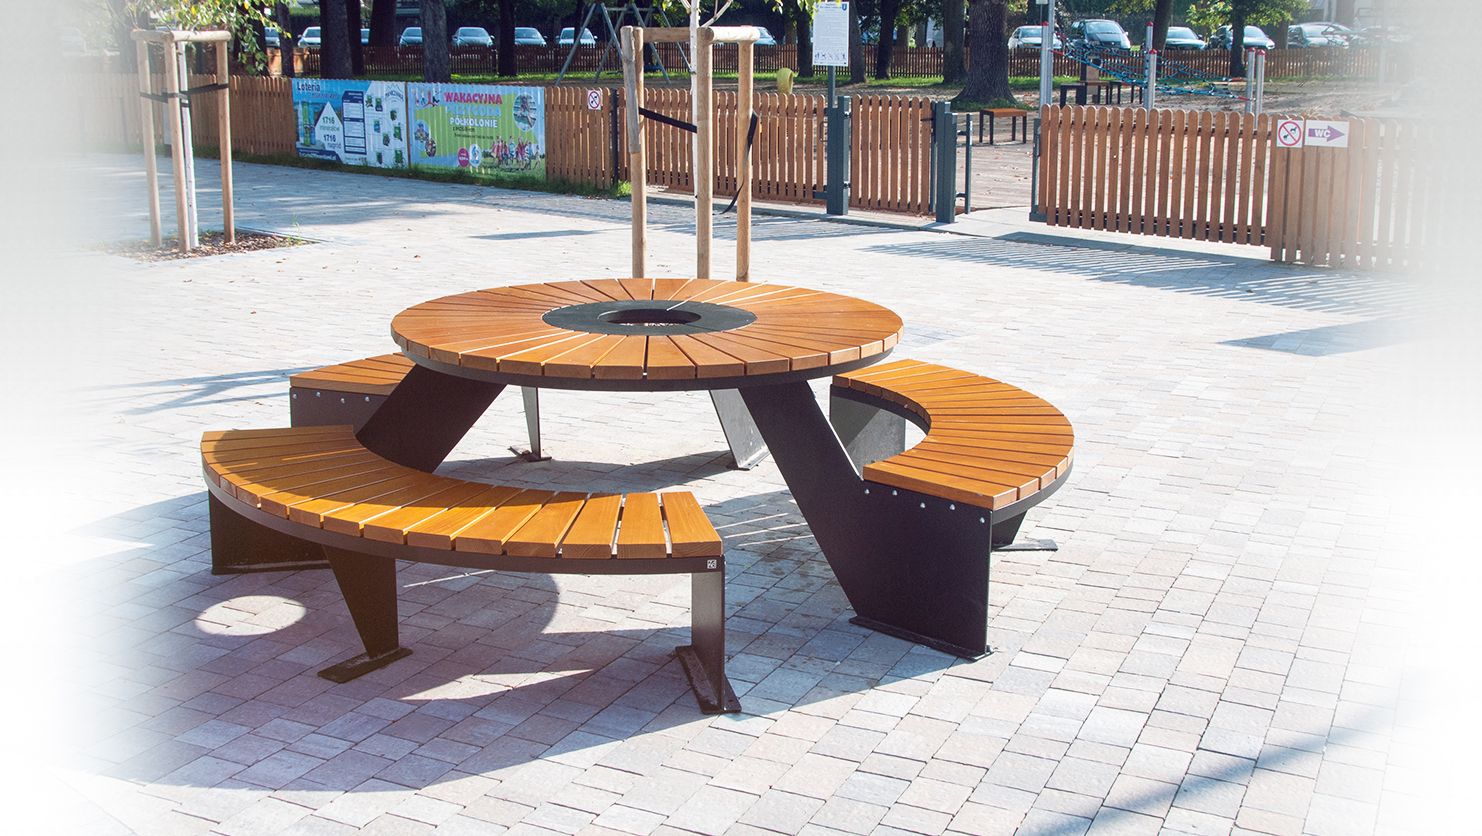 Picnic tables garden tables from the Domino urban furniture series